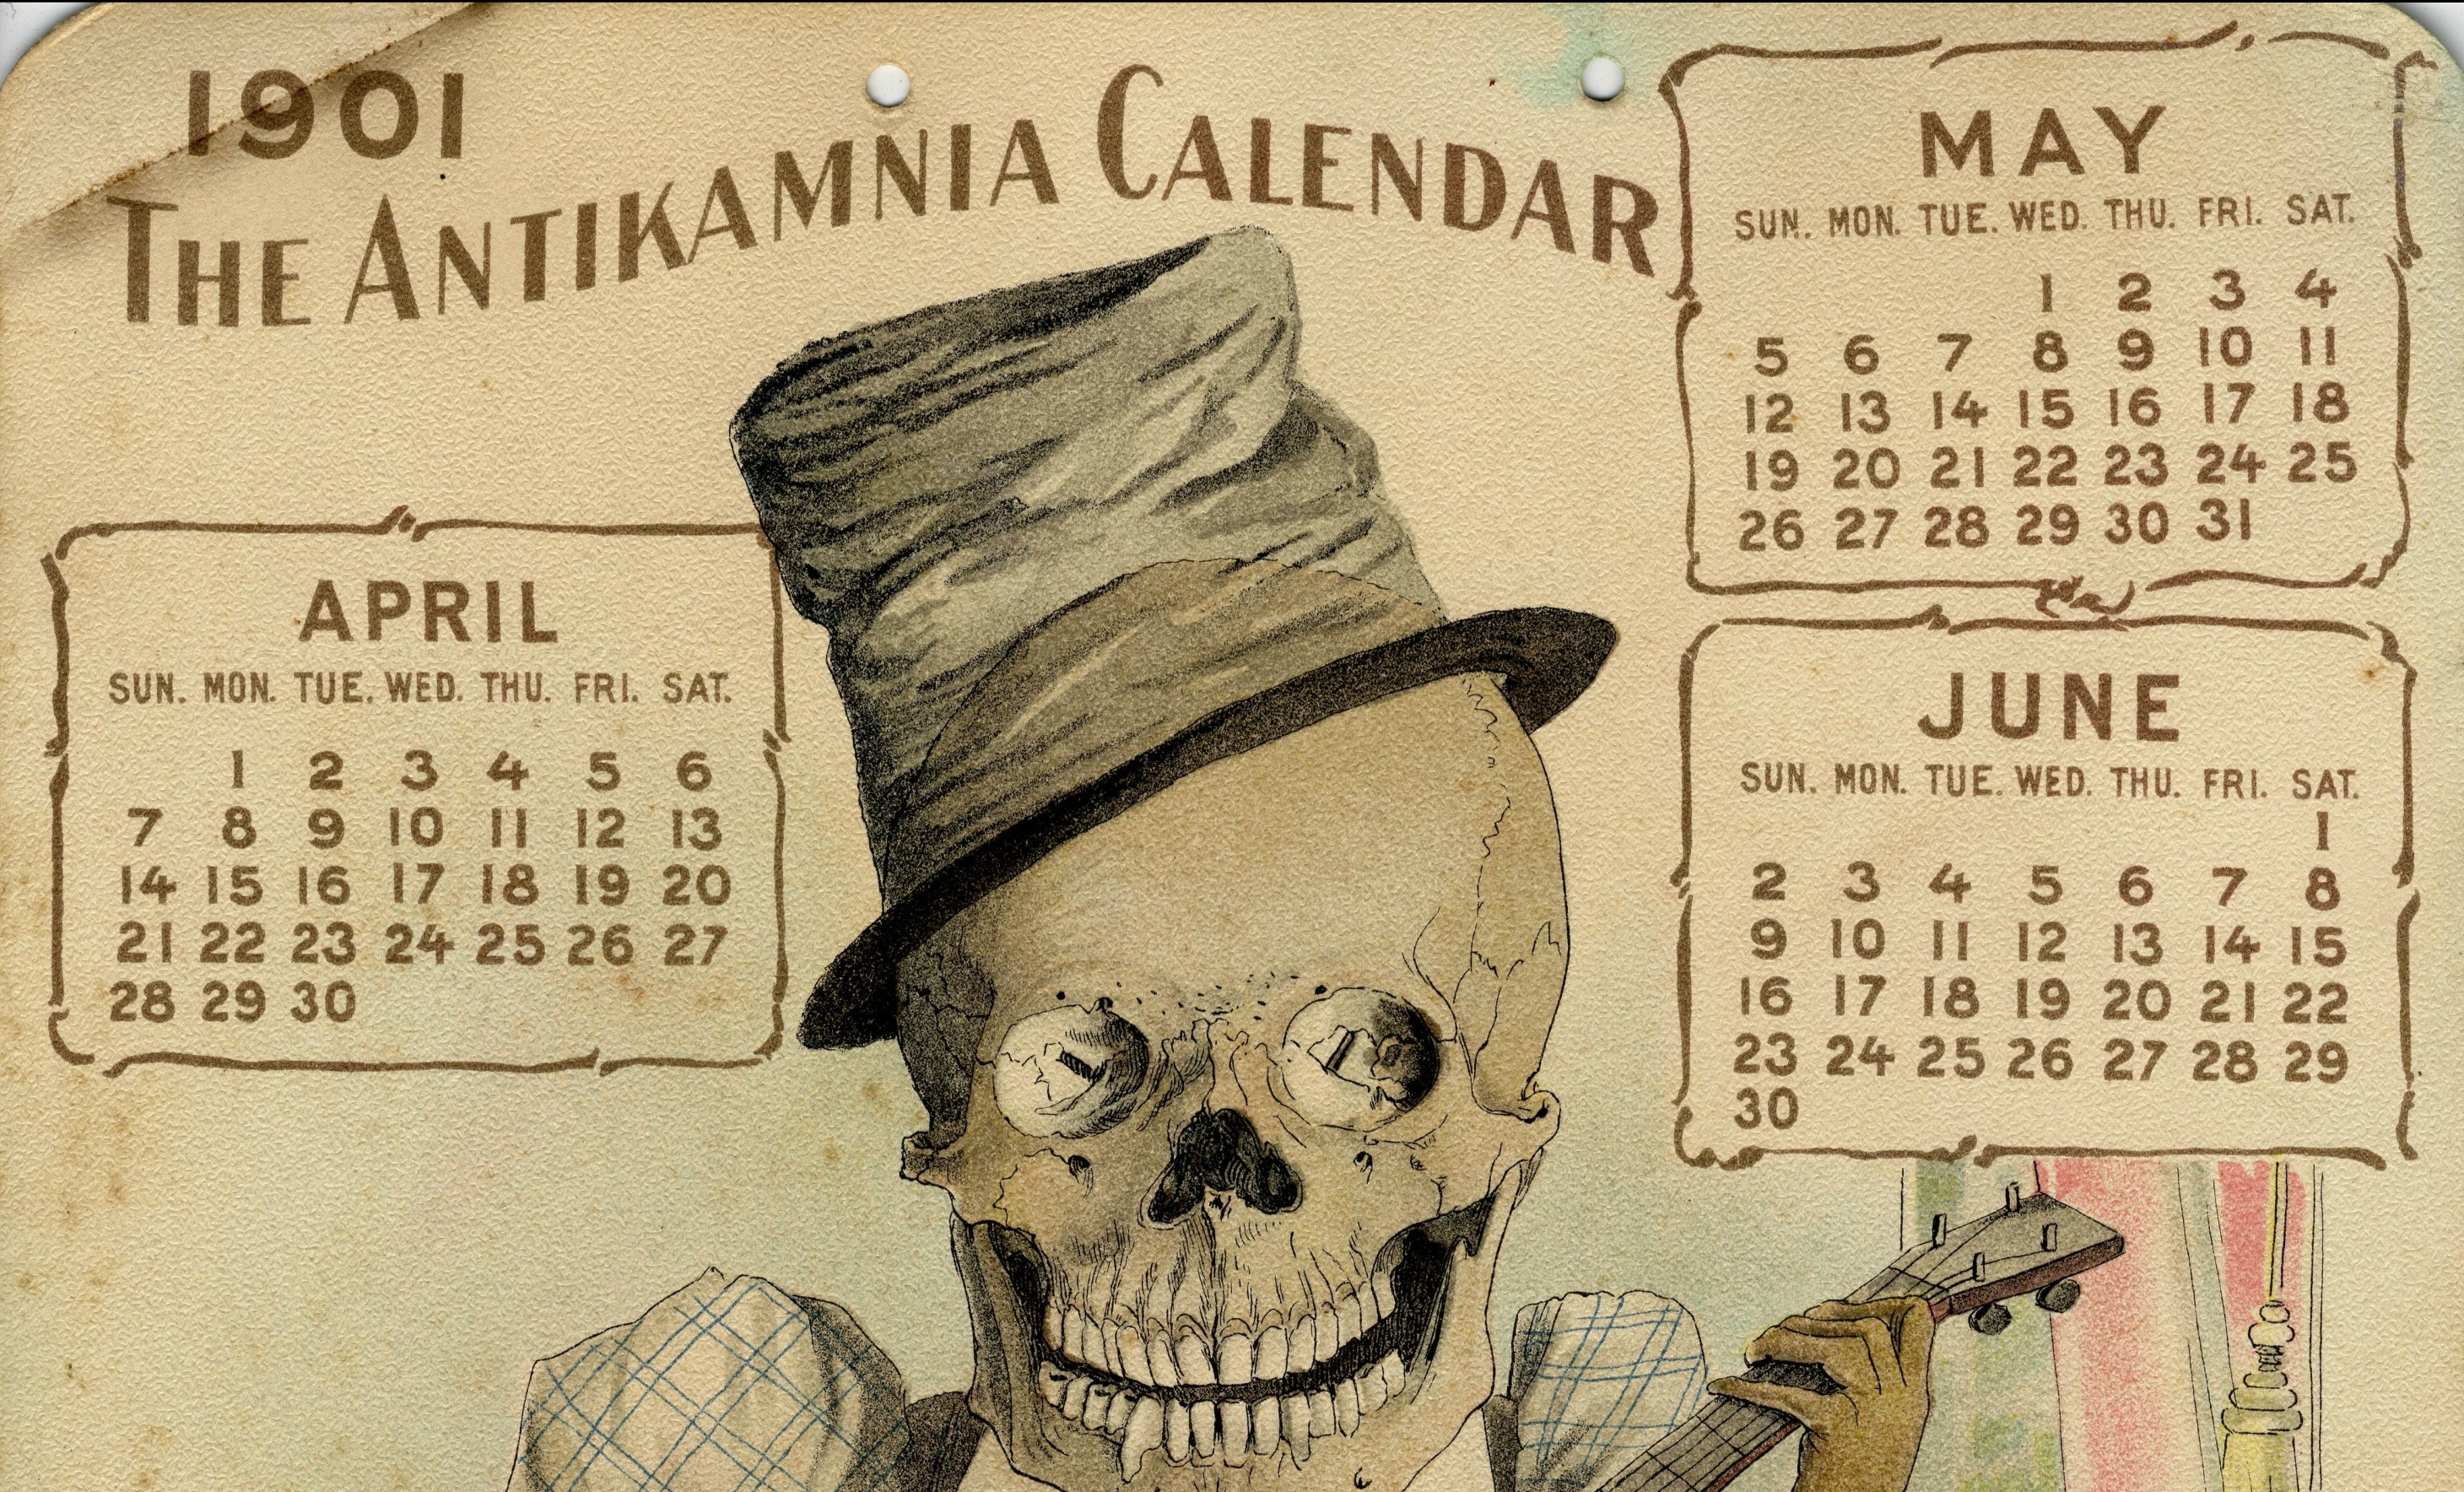 You Can Reuse These Vintage Calendars In 2019